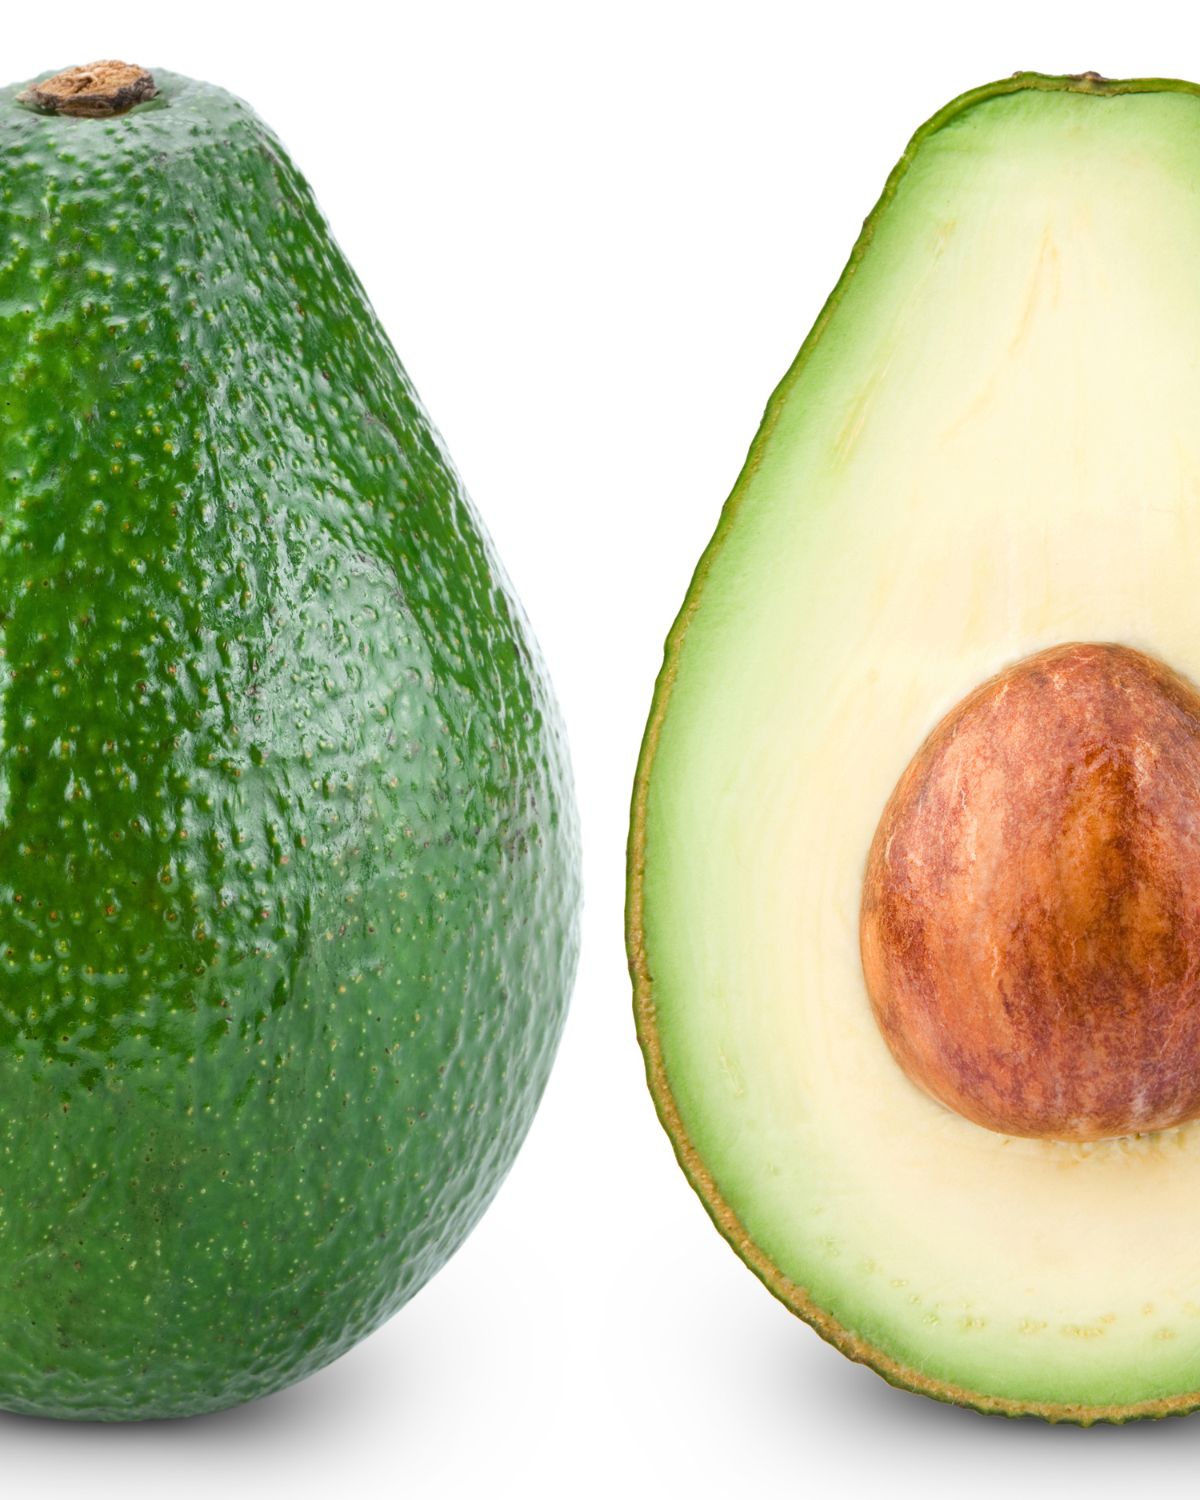 Two halfs of an avocado next to each other.